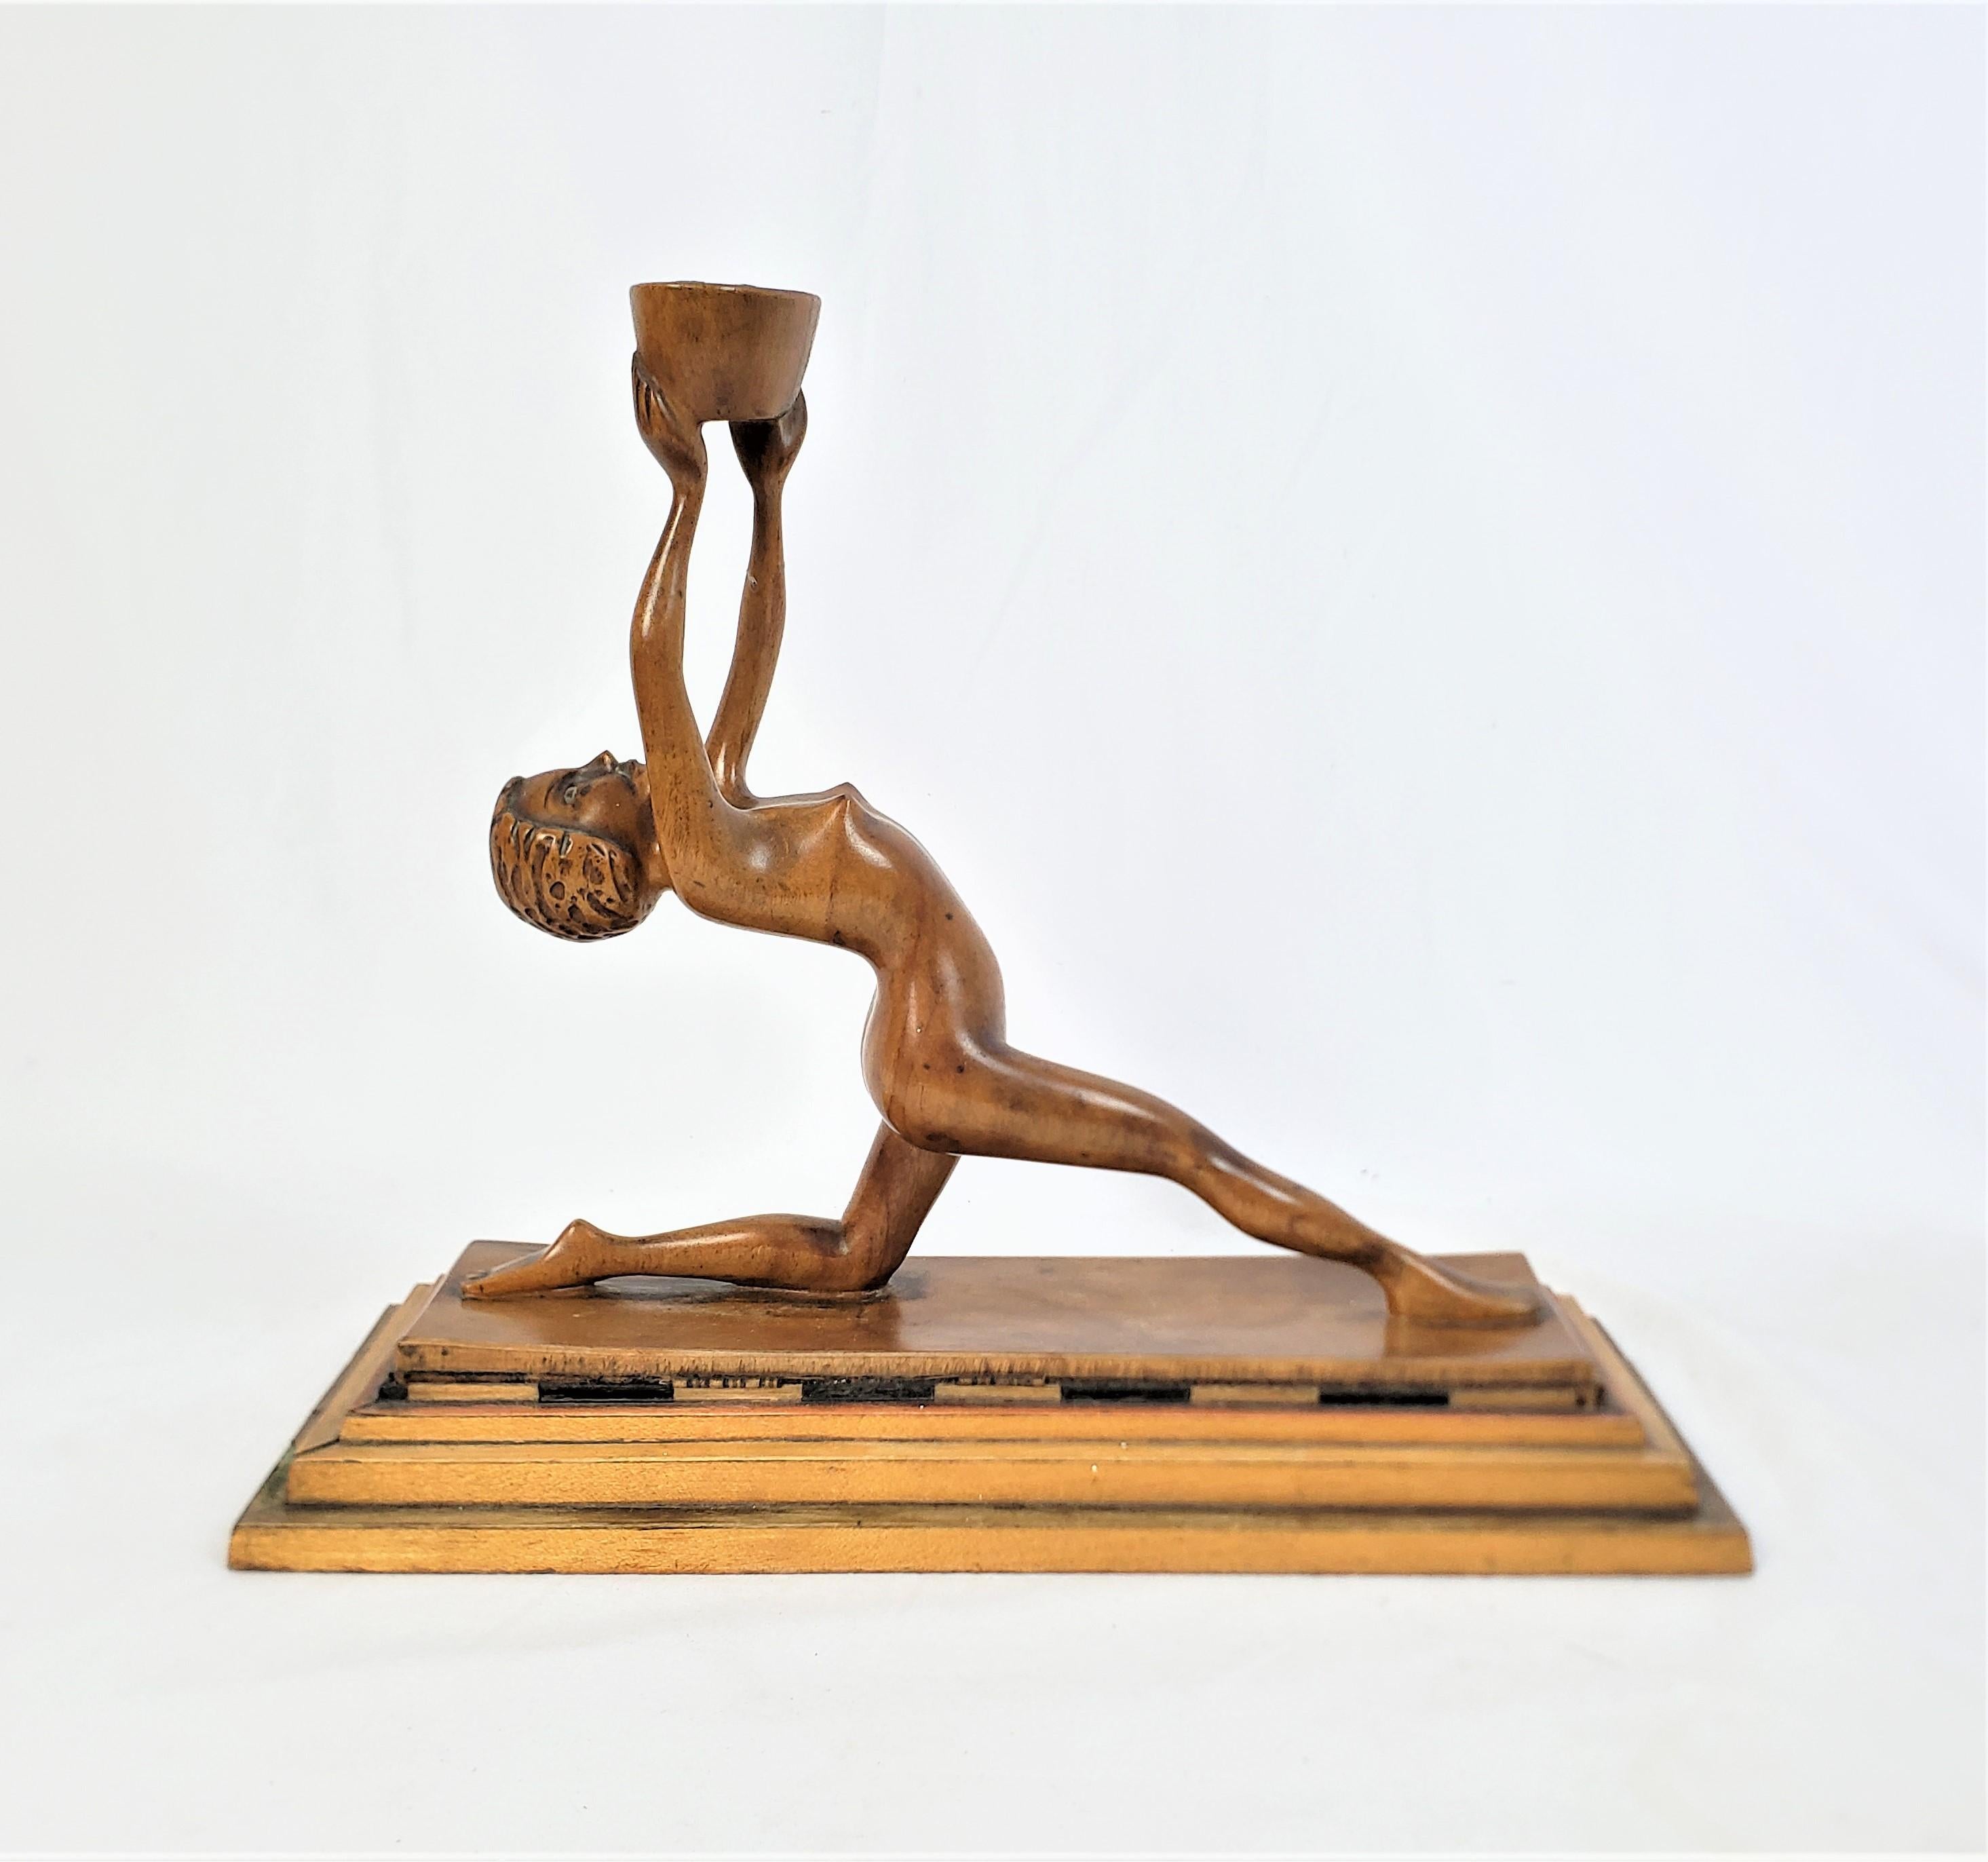 20th Century Antique Art Deco Hand-Carved Wooden Sculpture of a Nude Female Holding a Basket For Sale